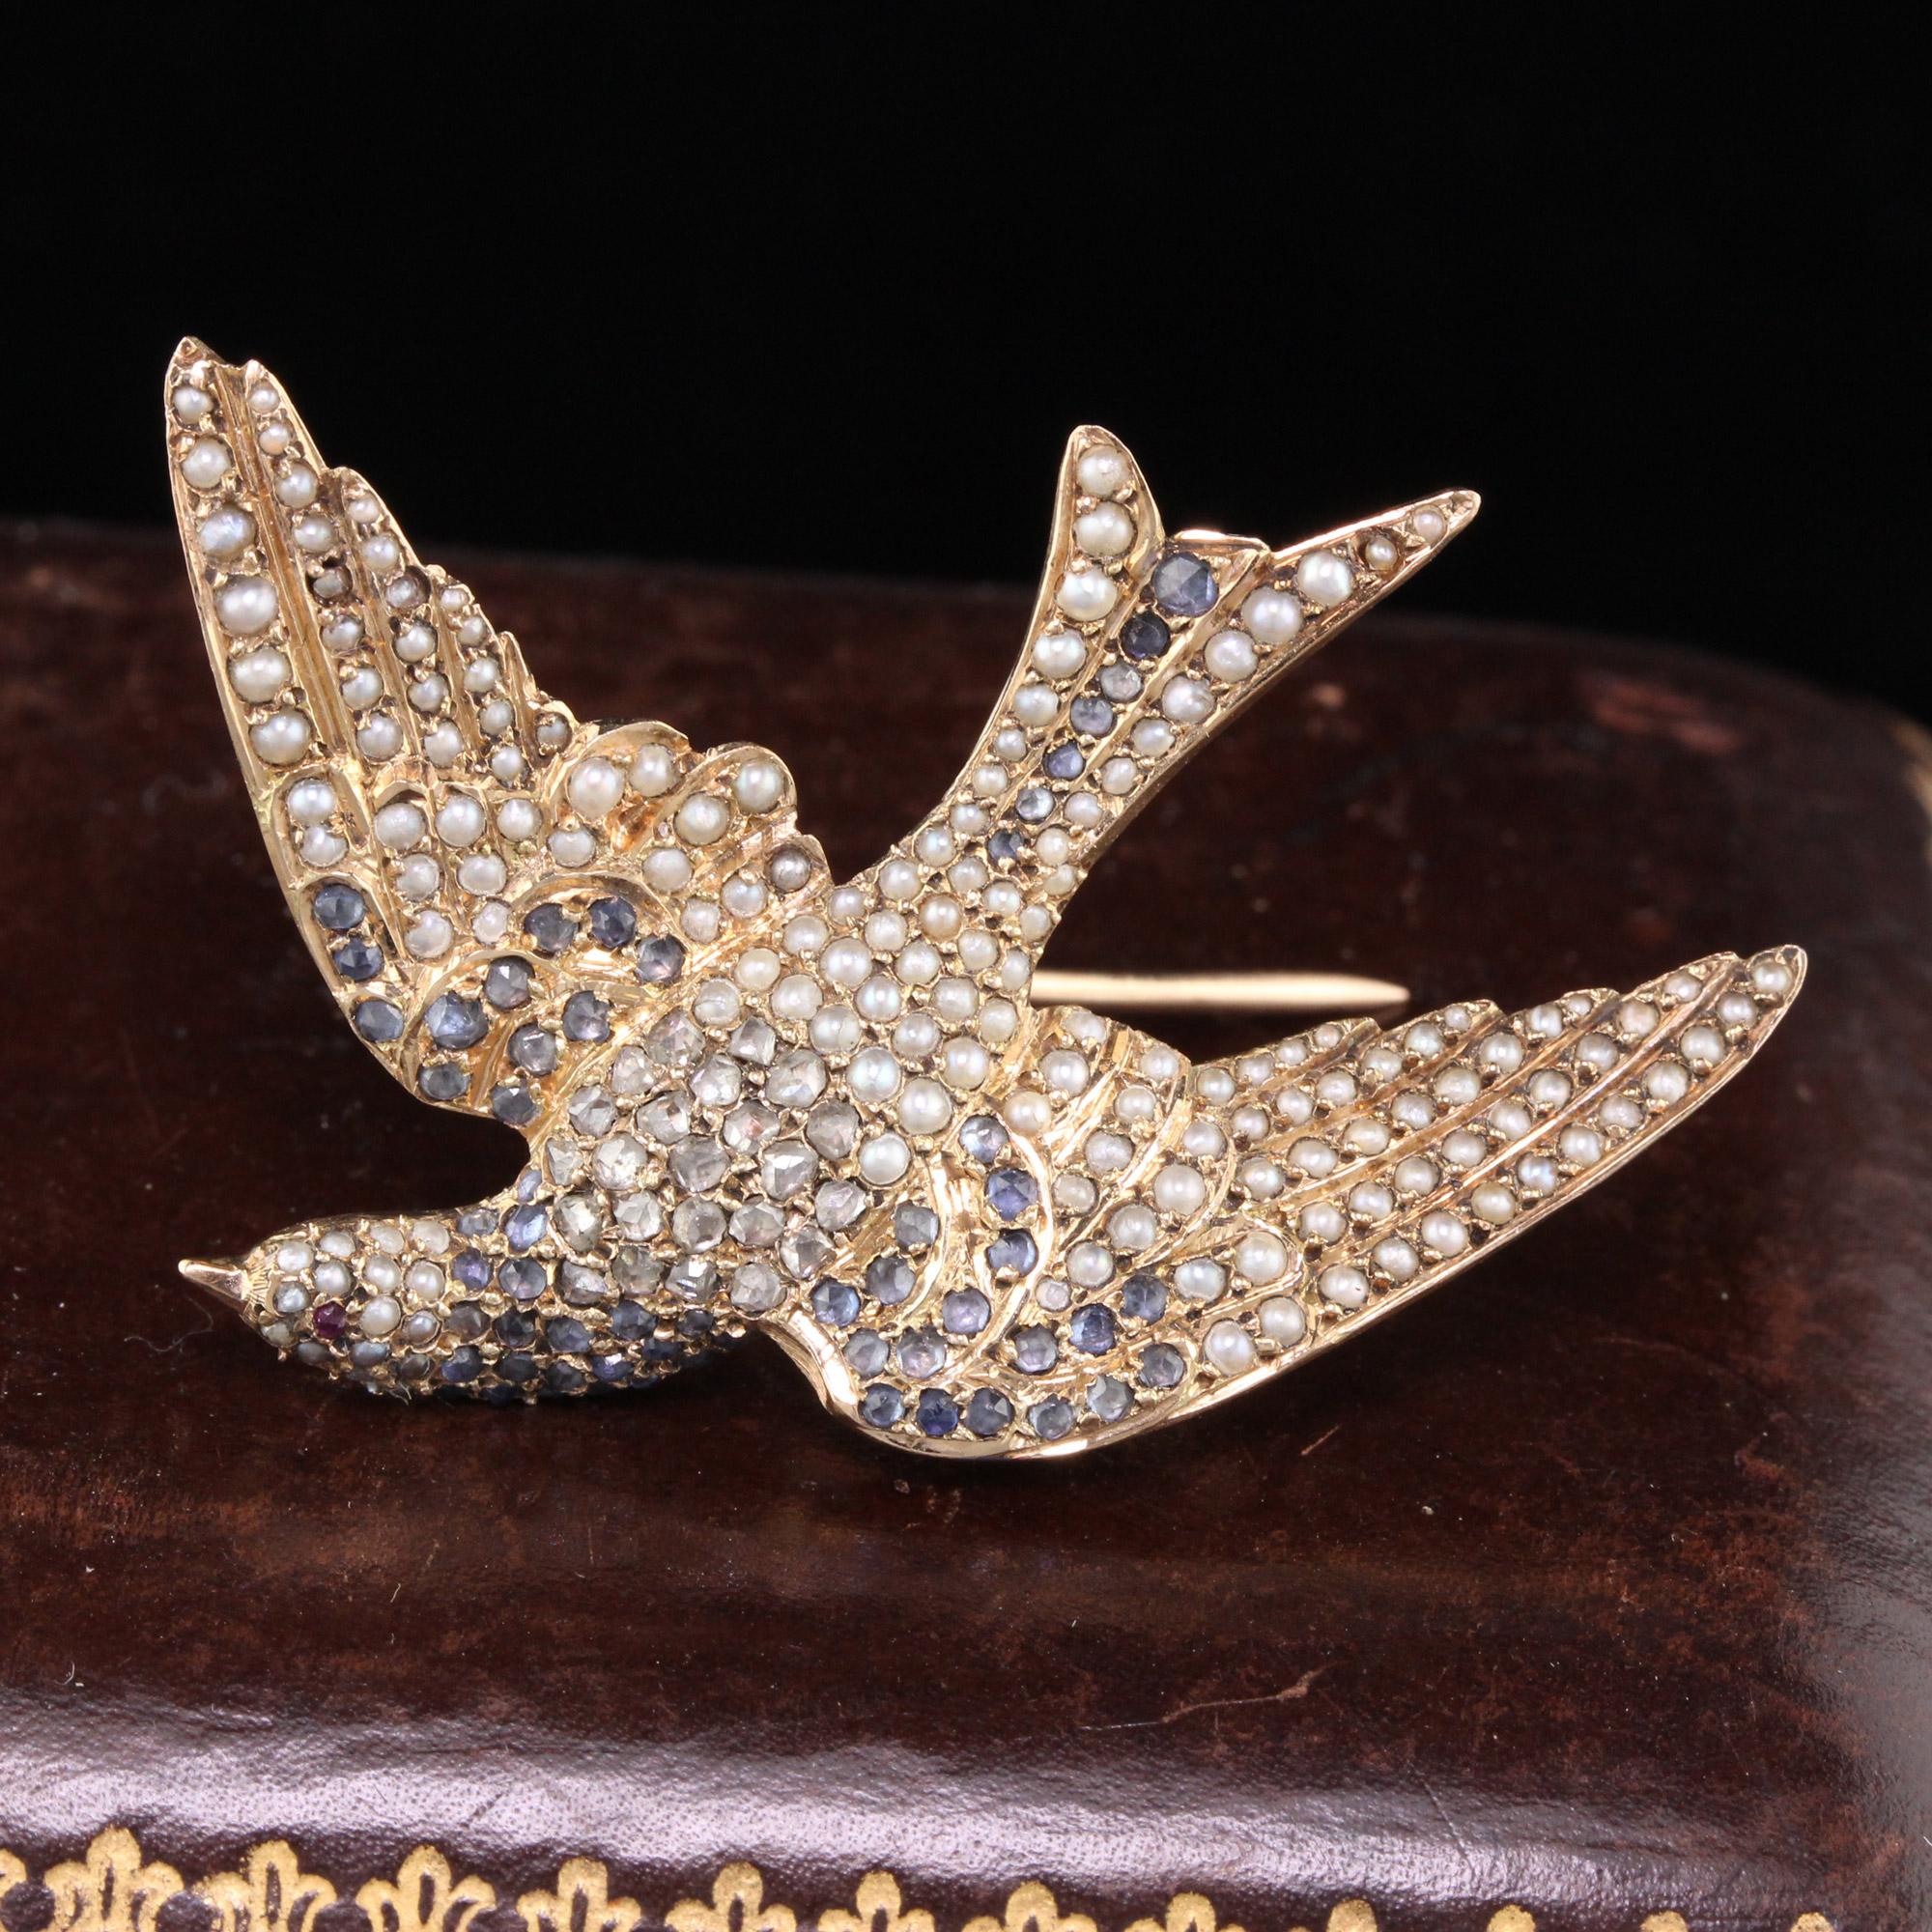 This stunning Victorian bird brooch is done in 18K rose gold with seed pearls, rose cut diamonds, and light blue sapphires. There is one ruby as the birds eye. 

Metal: 18K Rose Gold 

Weight: 12.5 Grams 

Measurements: 43.3 x 22 mm
